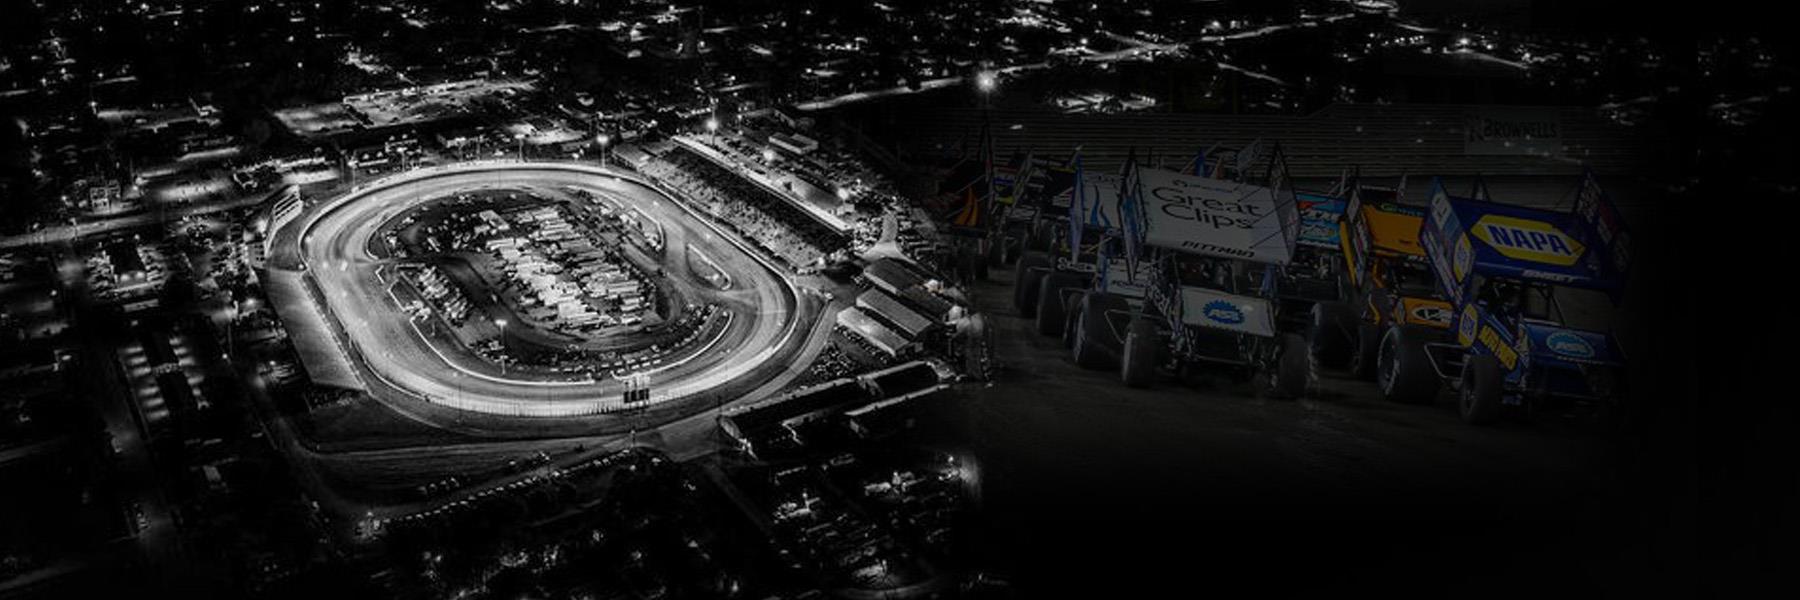 8/5/2022 - Knoxville Raceway